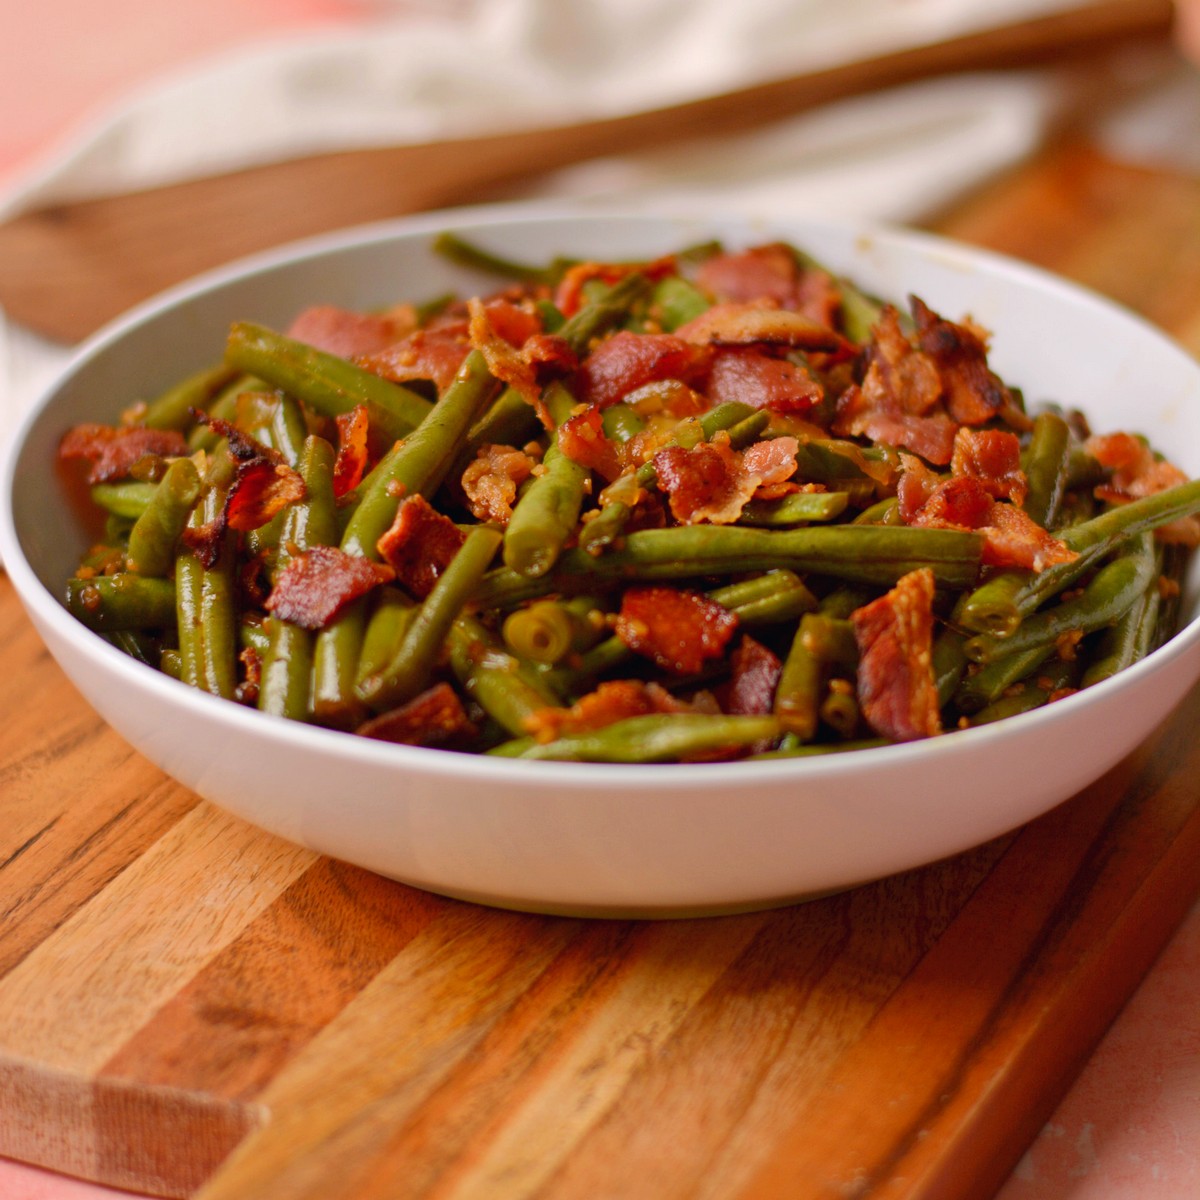 Bacon and green beans inside a shallow white bowl.